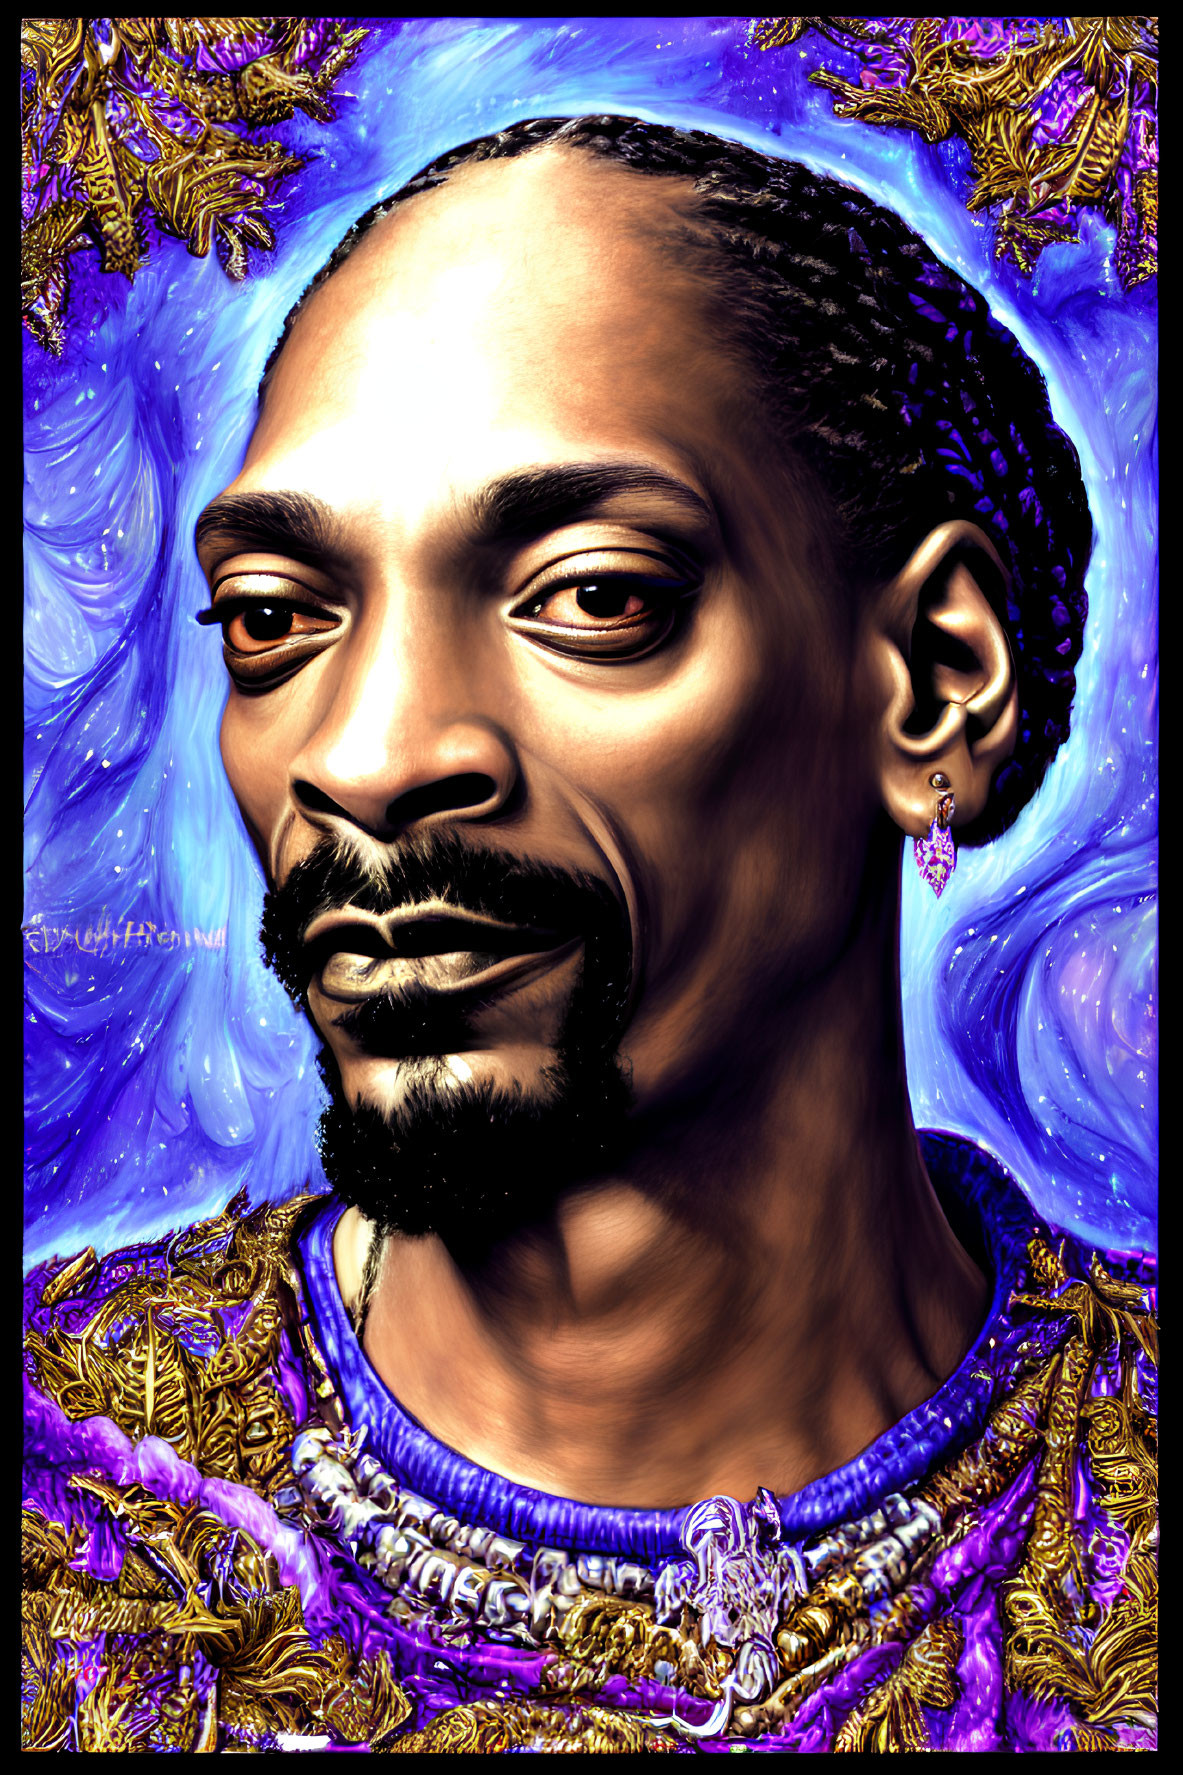 Vibrant digital portrait of man with braided hair and goatee